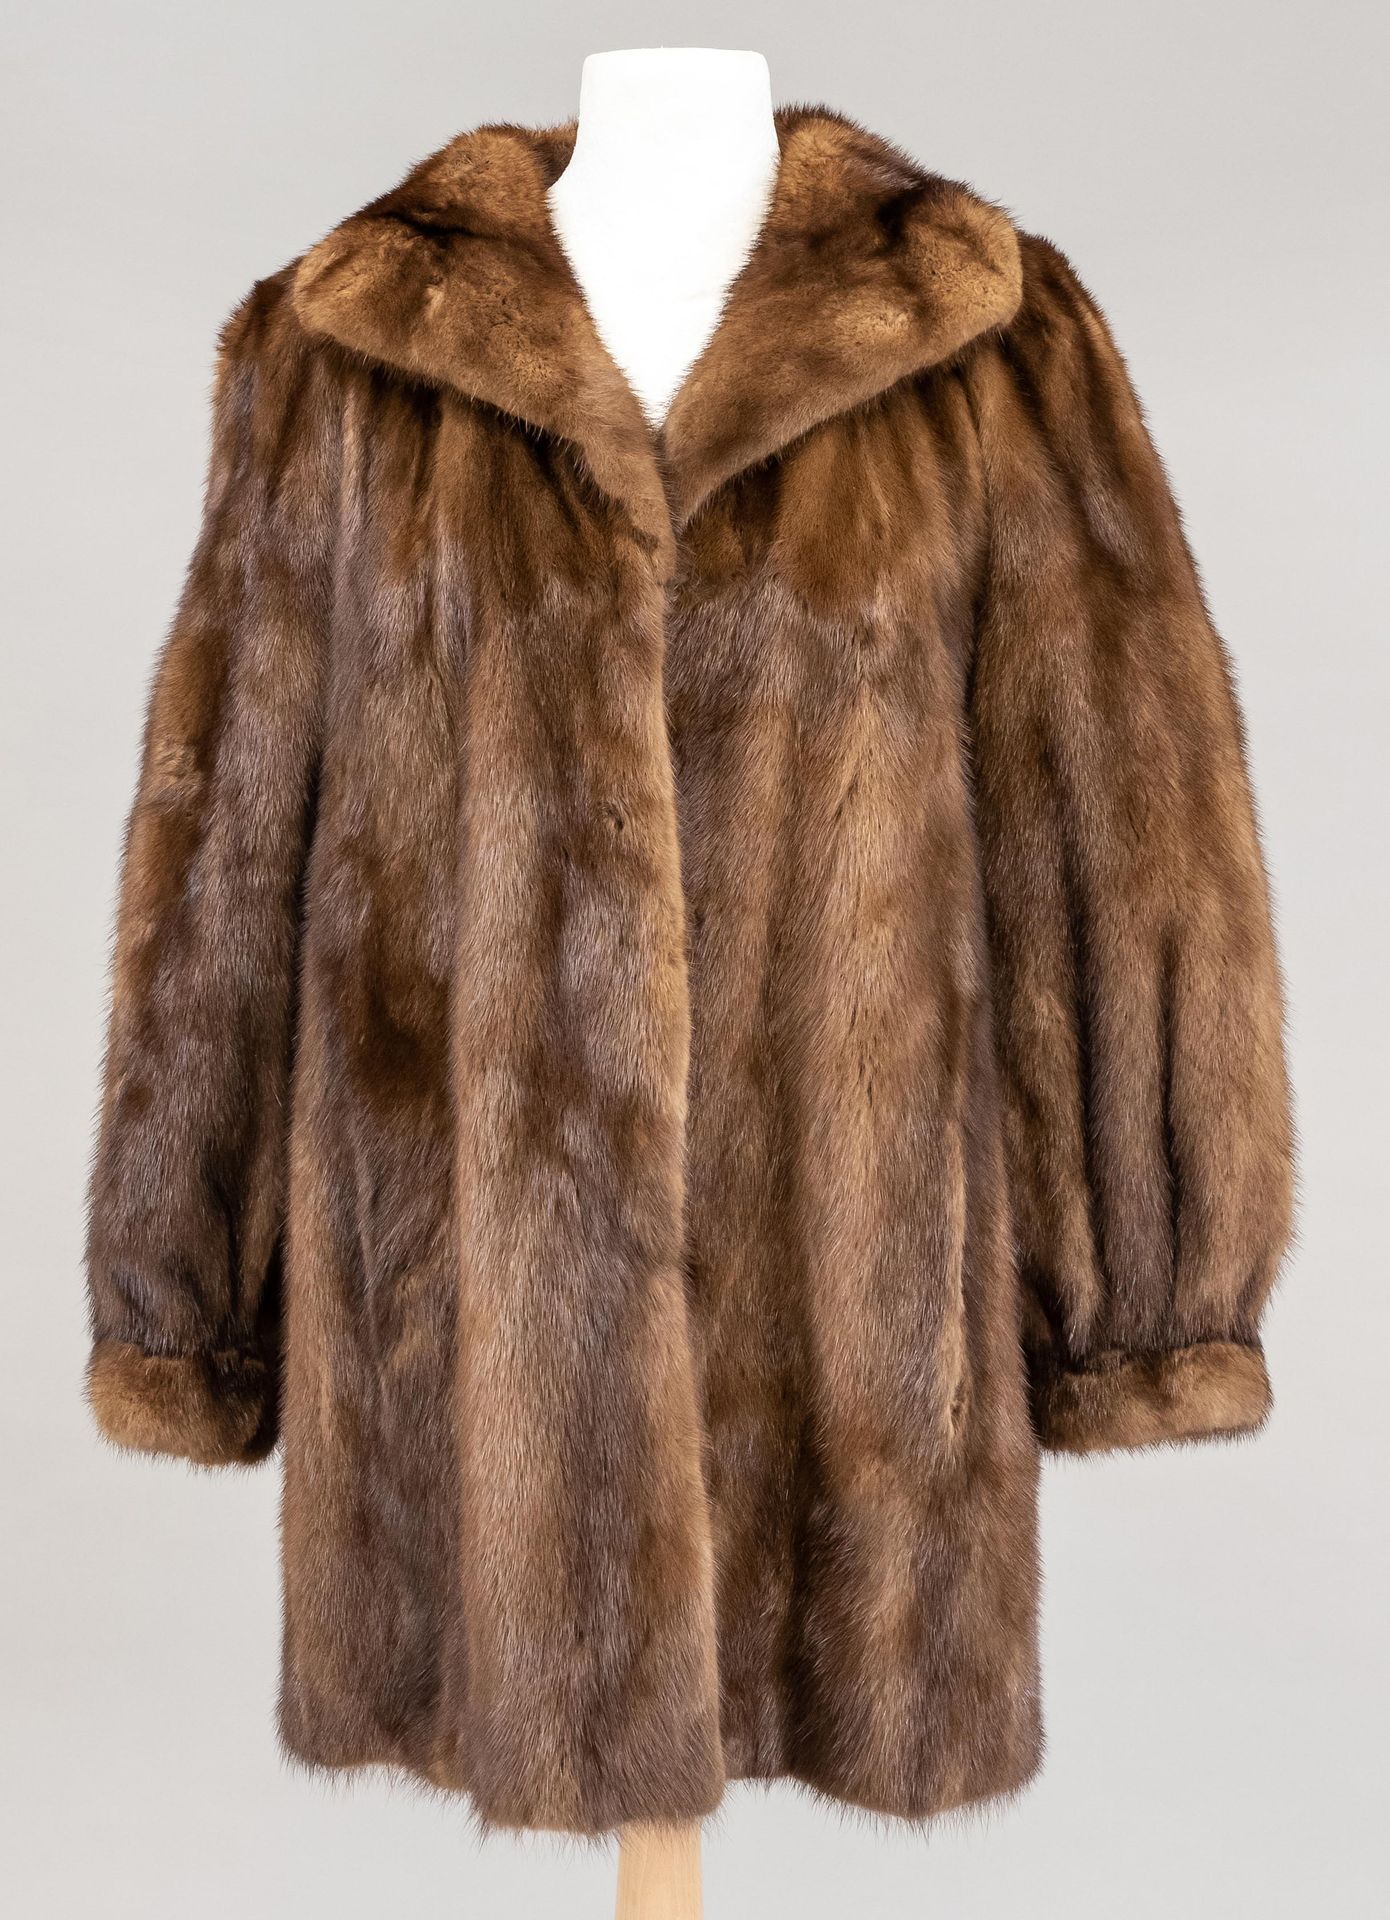 Null Women's mink jacket, marked Your Sixth Scythe/Saga Mink on a label in the l&hellip;